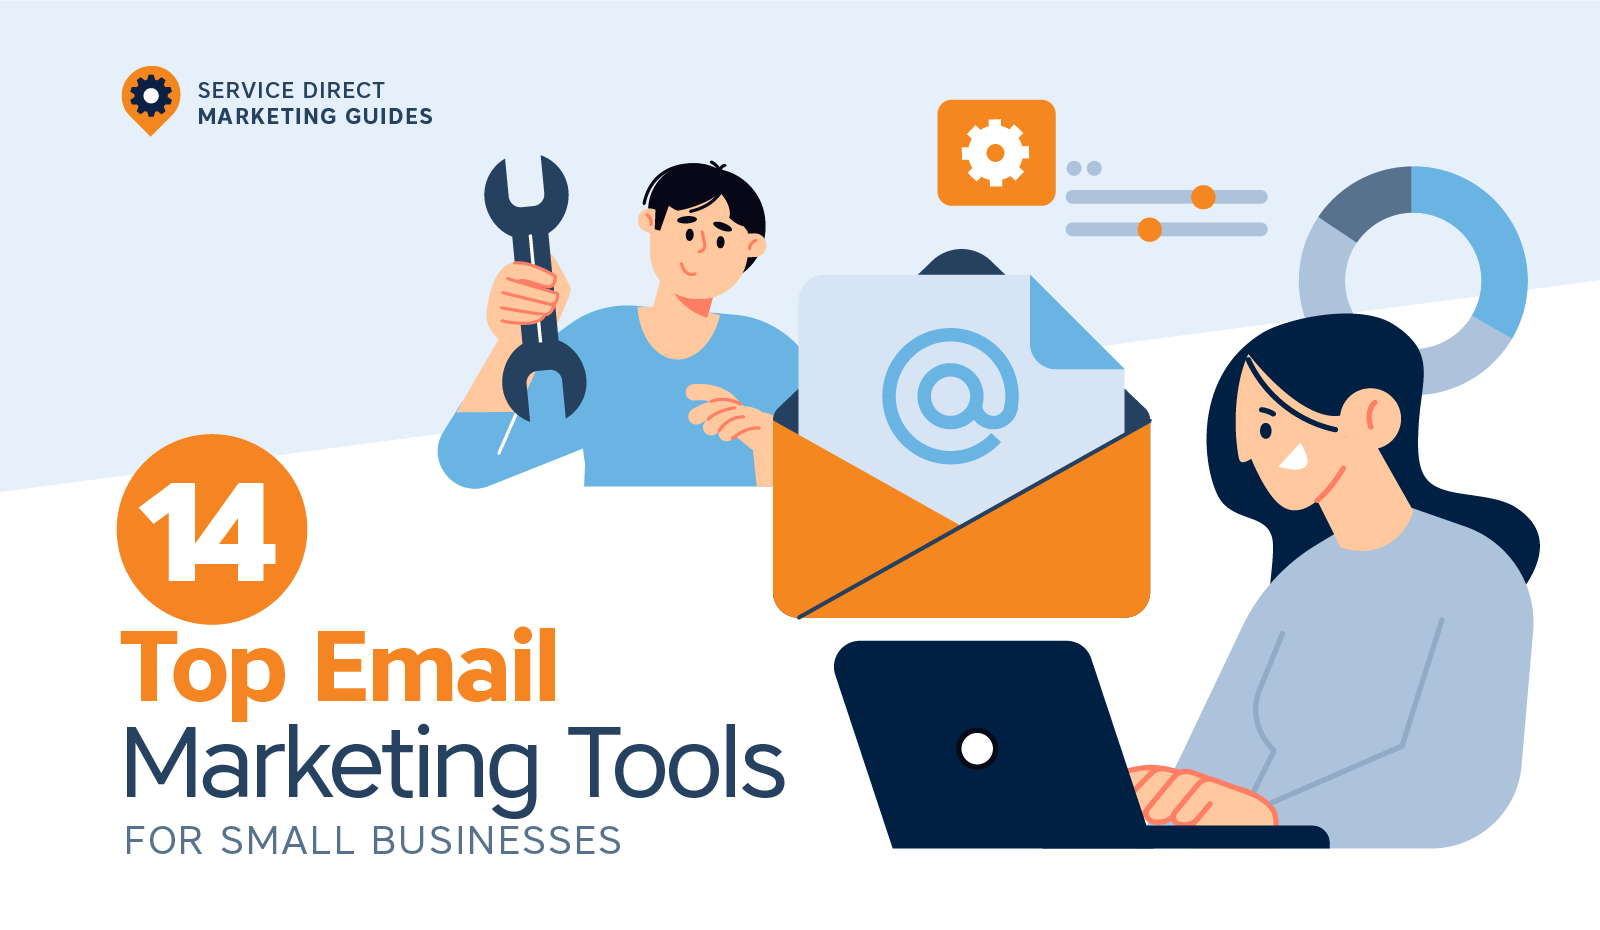 Top Email Marketing Tools for Small Businesses